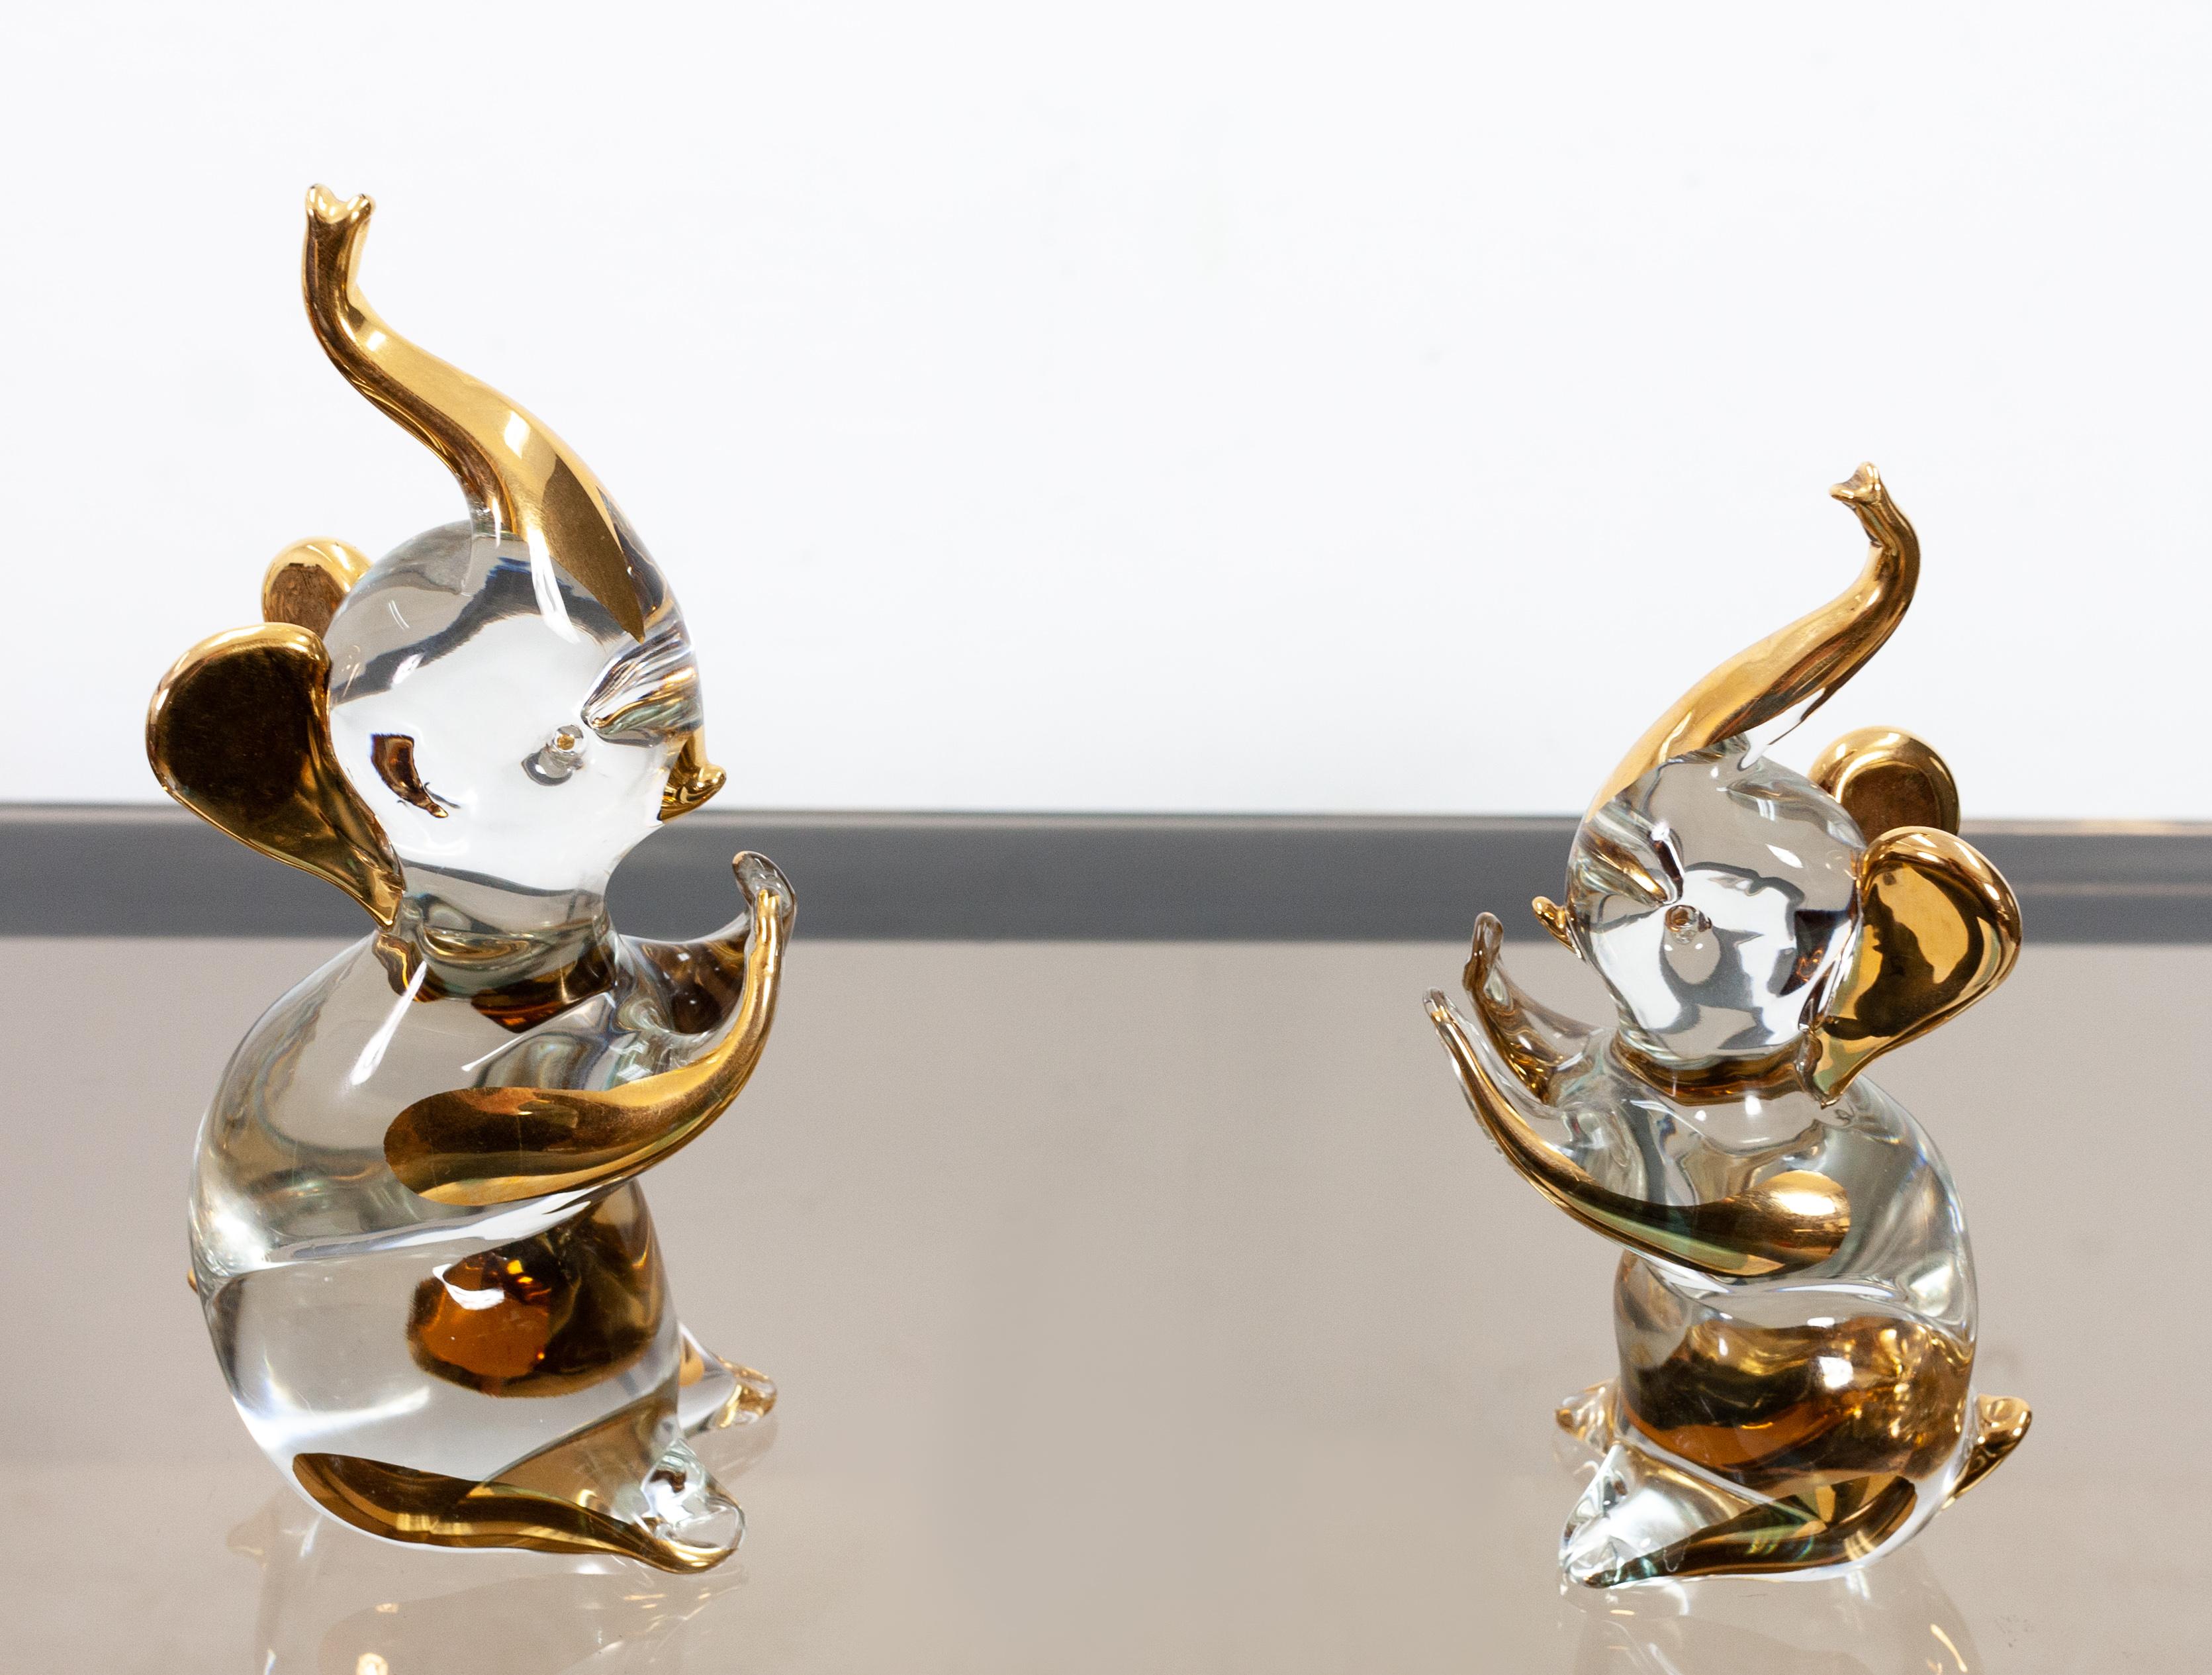 Two adorable little Elephants. Made by Murano 1980. Hollywood Regency style.
Chrystal glass with 24-carat gold. Very nice bookends. Excellent condition.

Smaller one height 19 cm, width 6 cm, depth 8 cm
Larger one height 22 cm, width 7 cm, depth